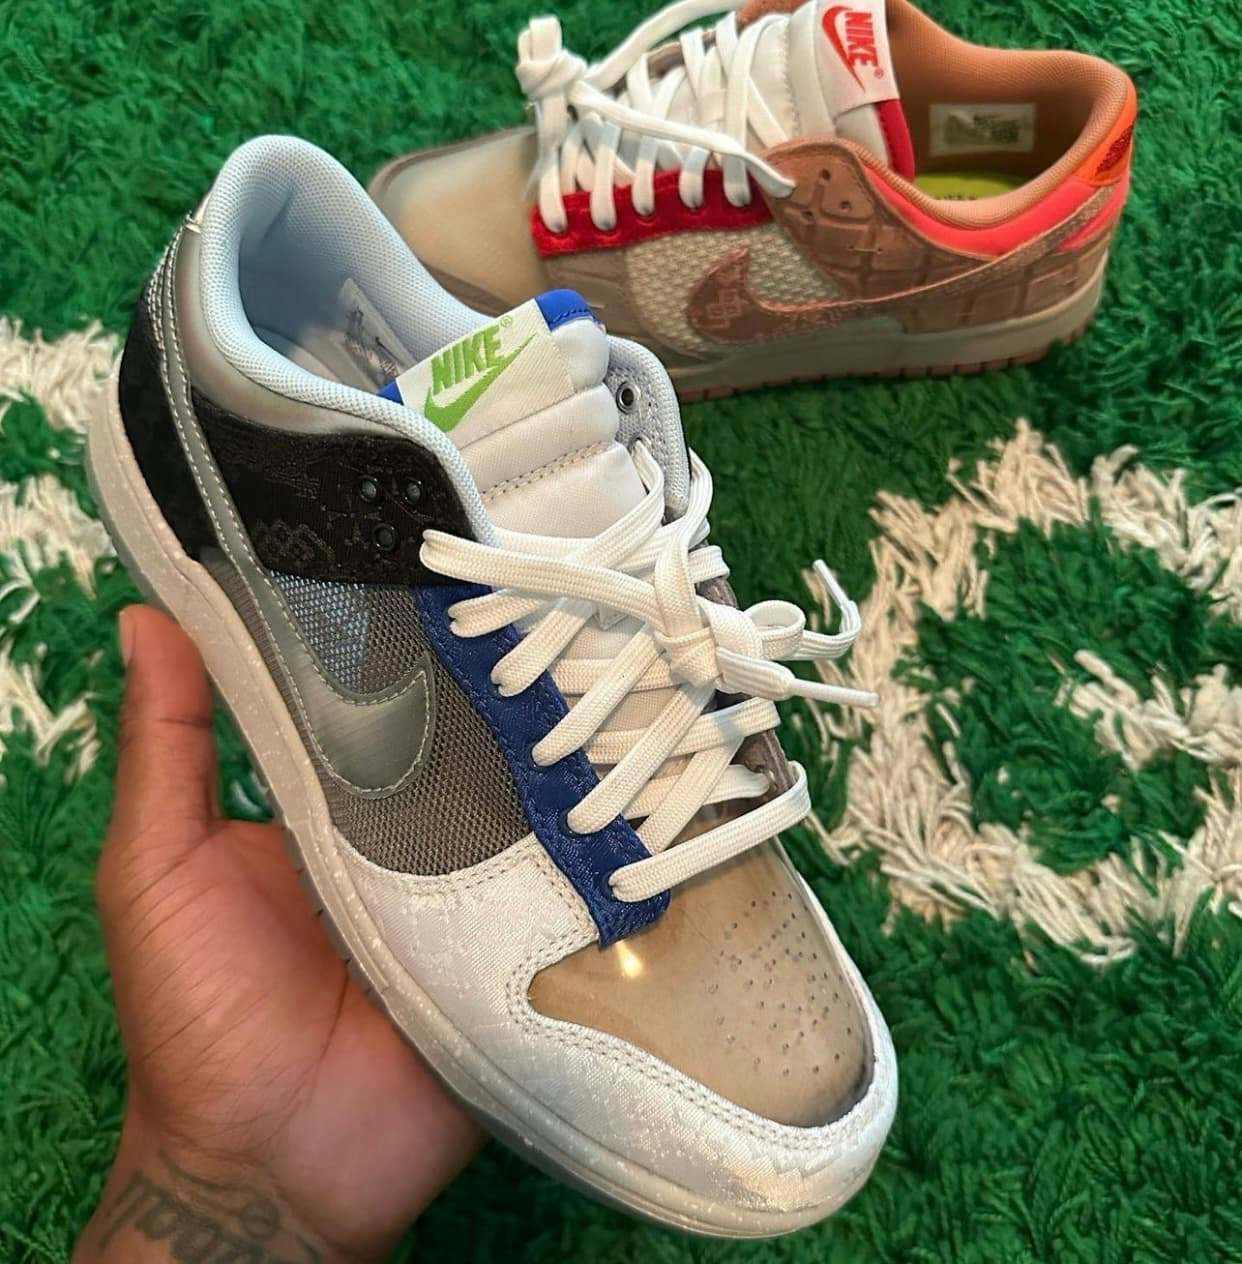 CLOT x Nike Dunk Low "What The"